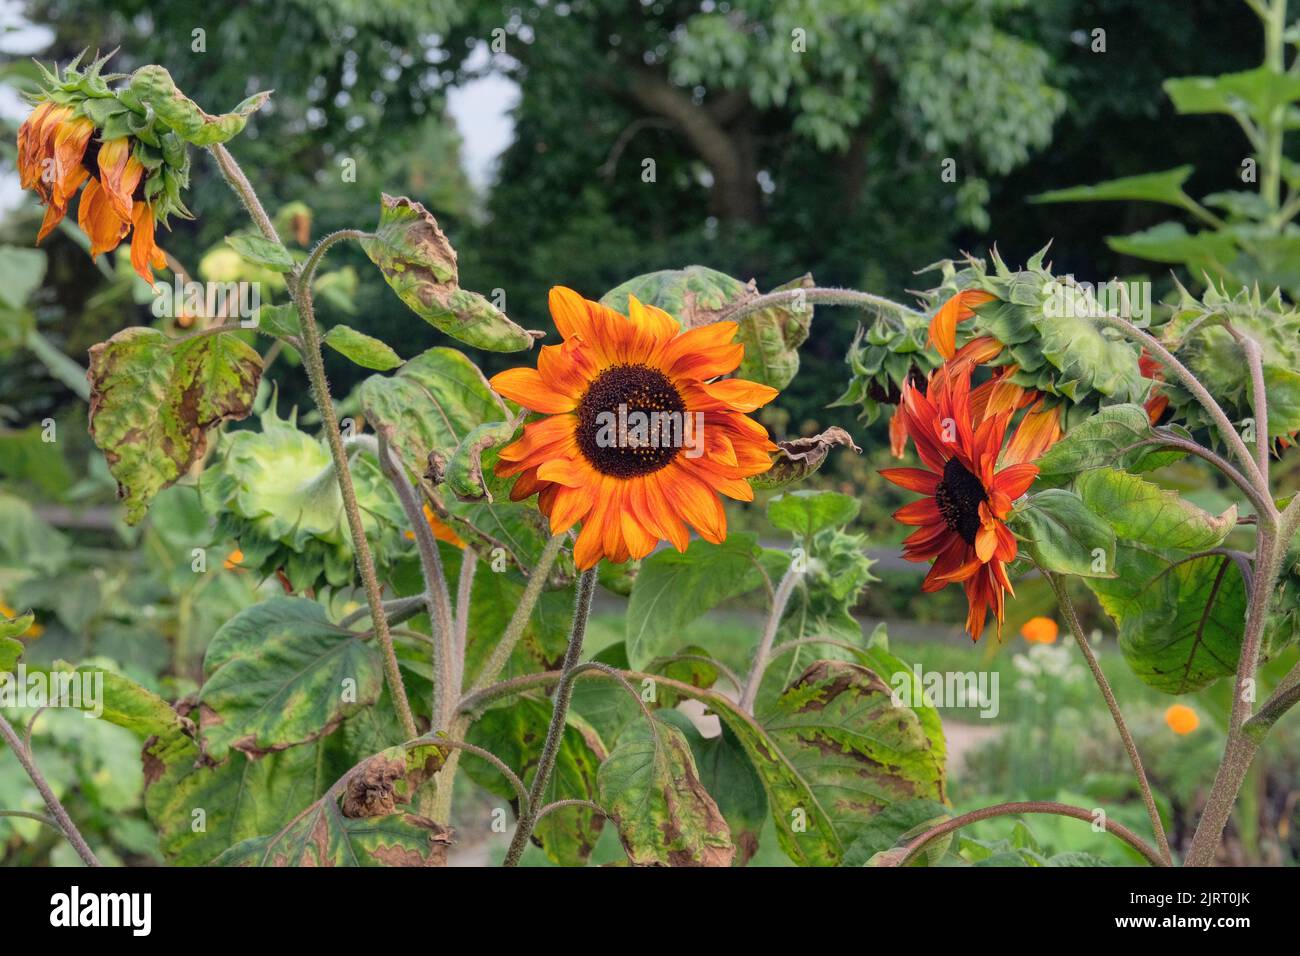 Sunflowers is growing in rural garden. Open ground flat bed into the garden. Farming background. Stock Photo